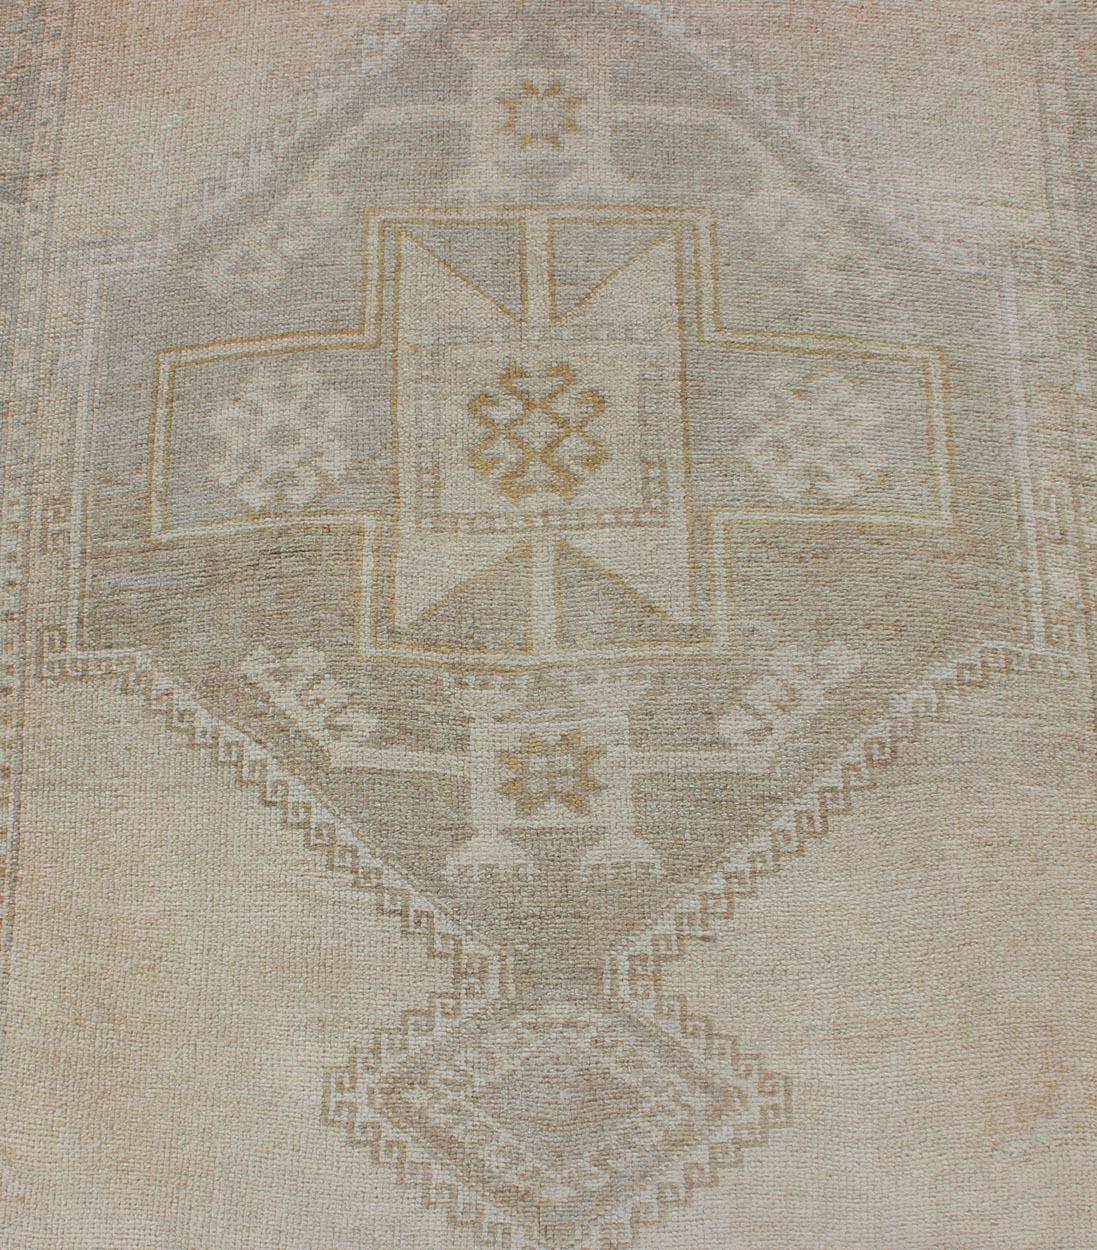 Vintage Turkish Oushak Runner with Etched Medallion Design in Soft Muted Tones For Sale 2